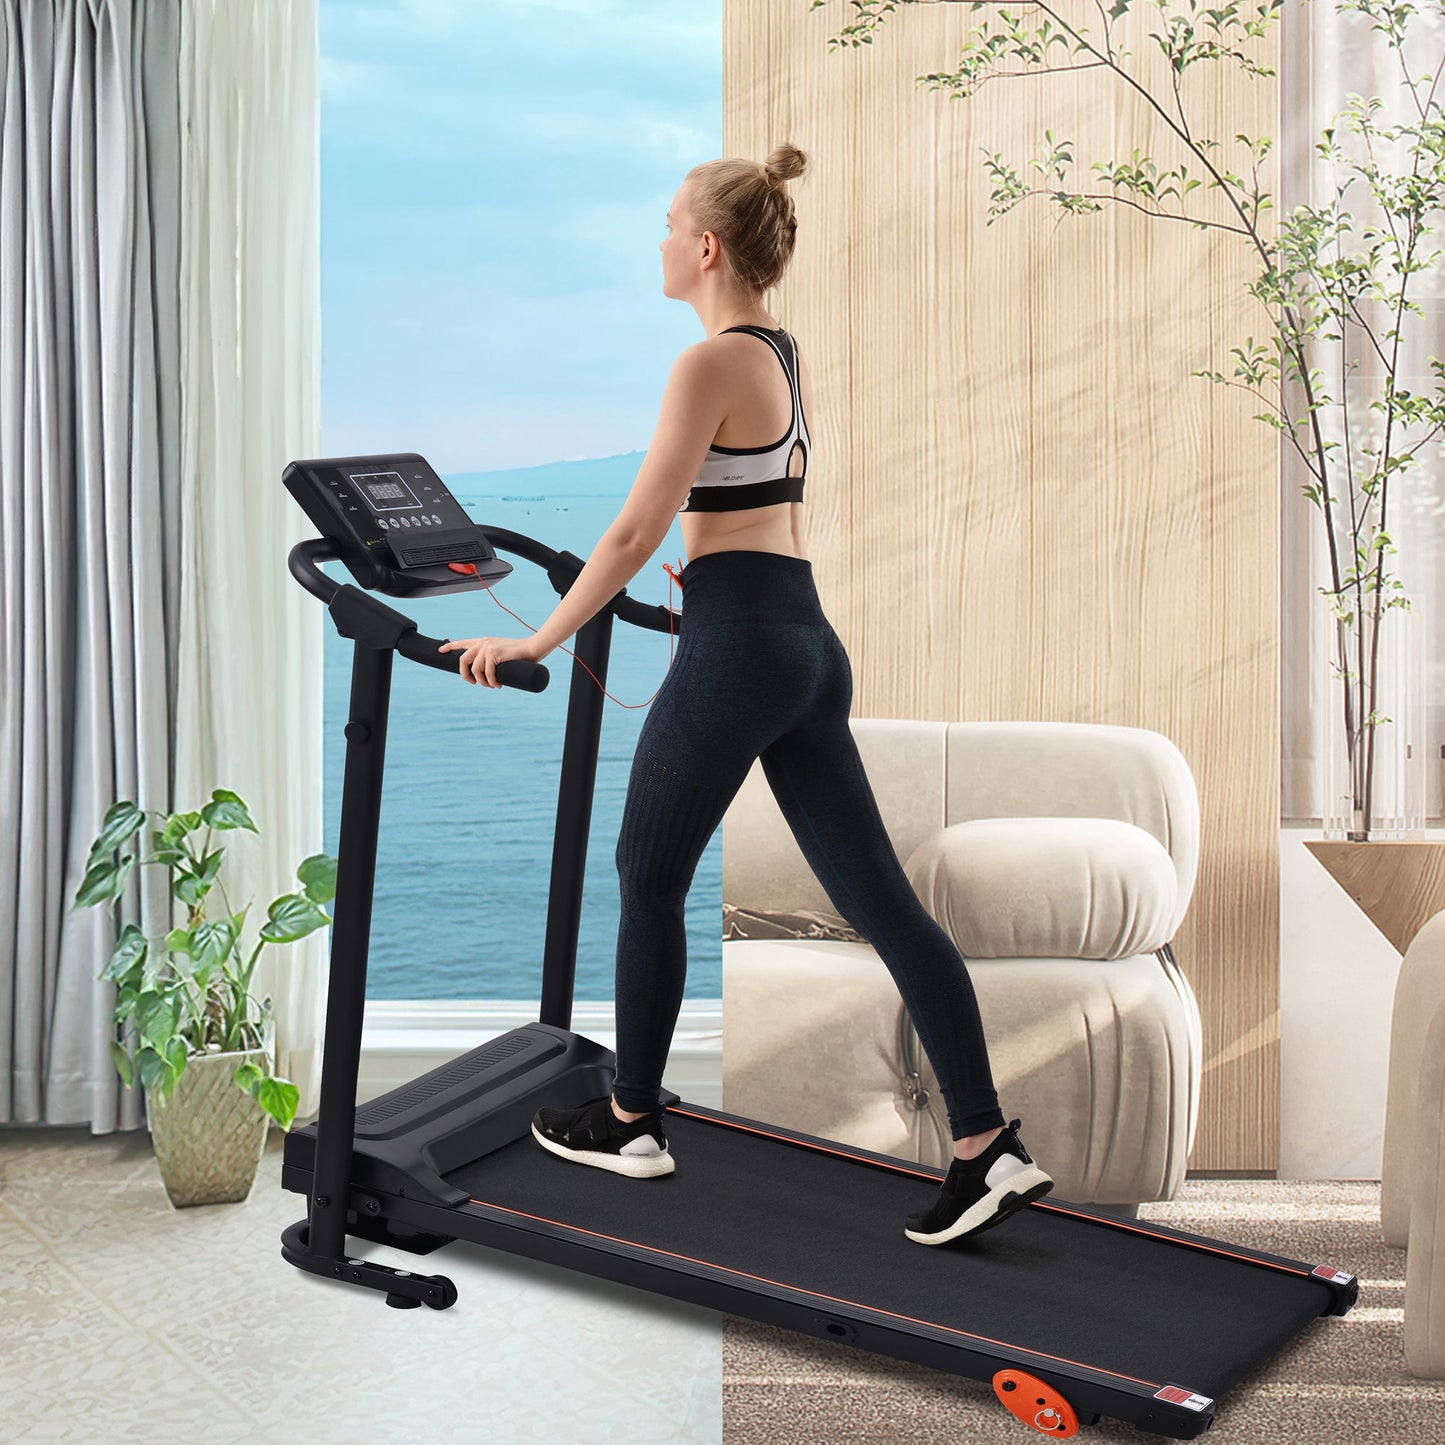 Akutes Electric Foldable Treadmill with Heart Pulse Monitor with Speaker & Incline Adjuster for Home Gym